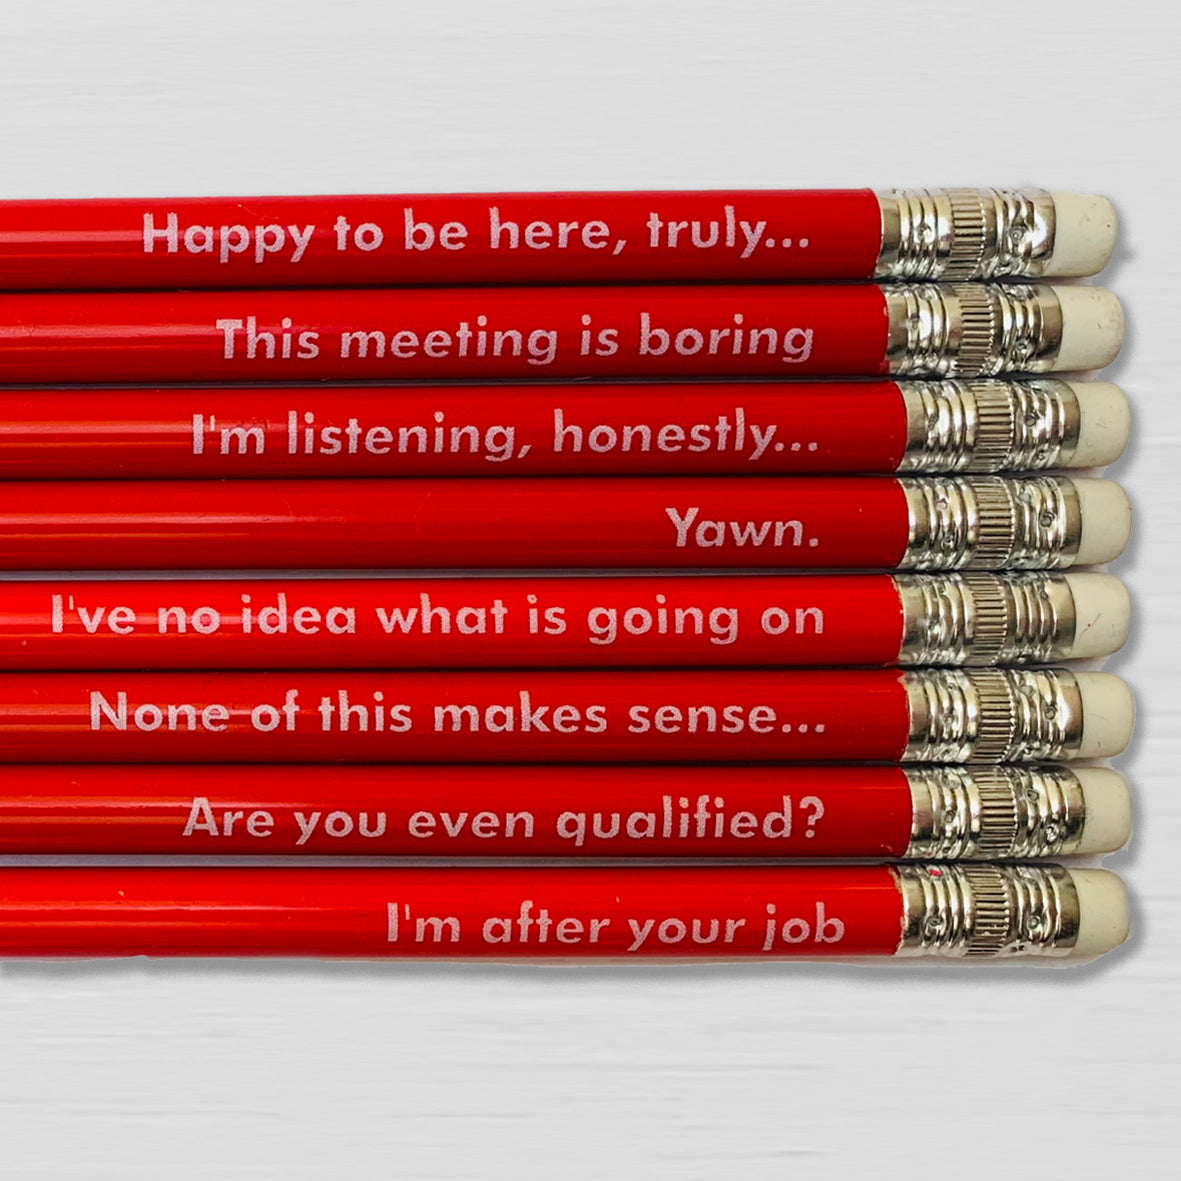 Number Ninety Five; 8 red pencils with a silver ferrule and white eraser, with Passive Aggressive sayings, such as 'this meeting is boring, or I have no idea what is going on' written in a white text. 